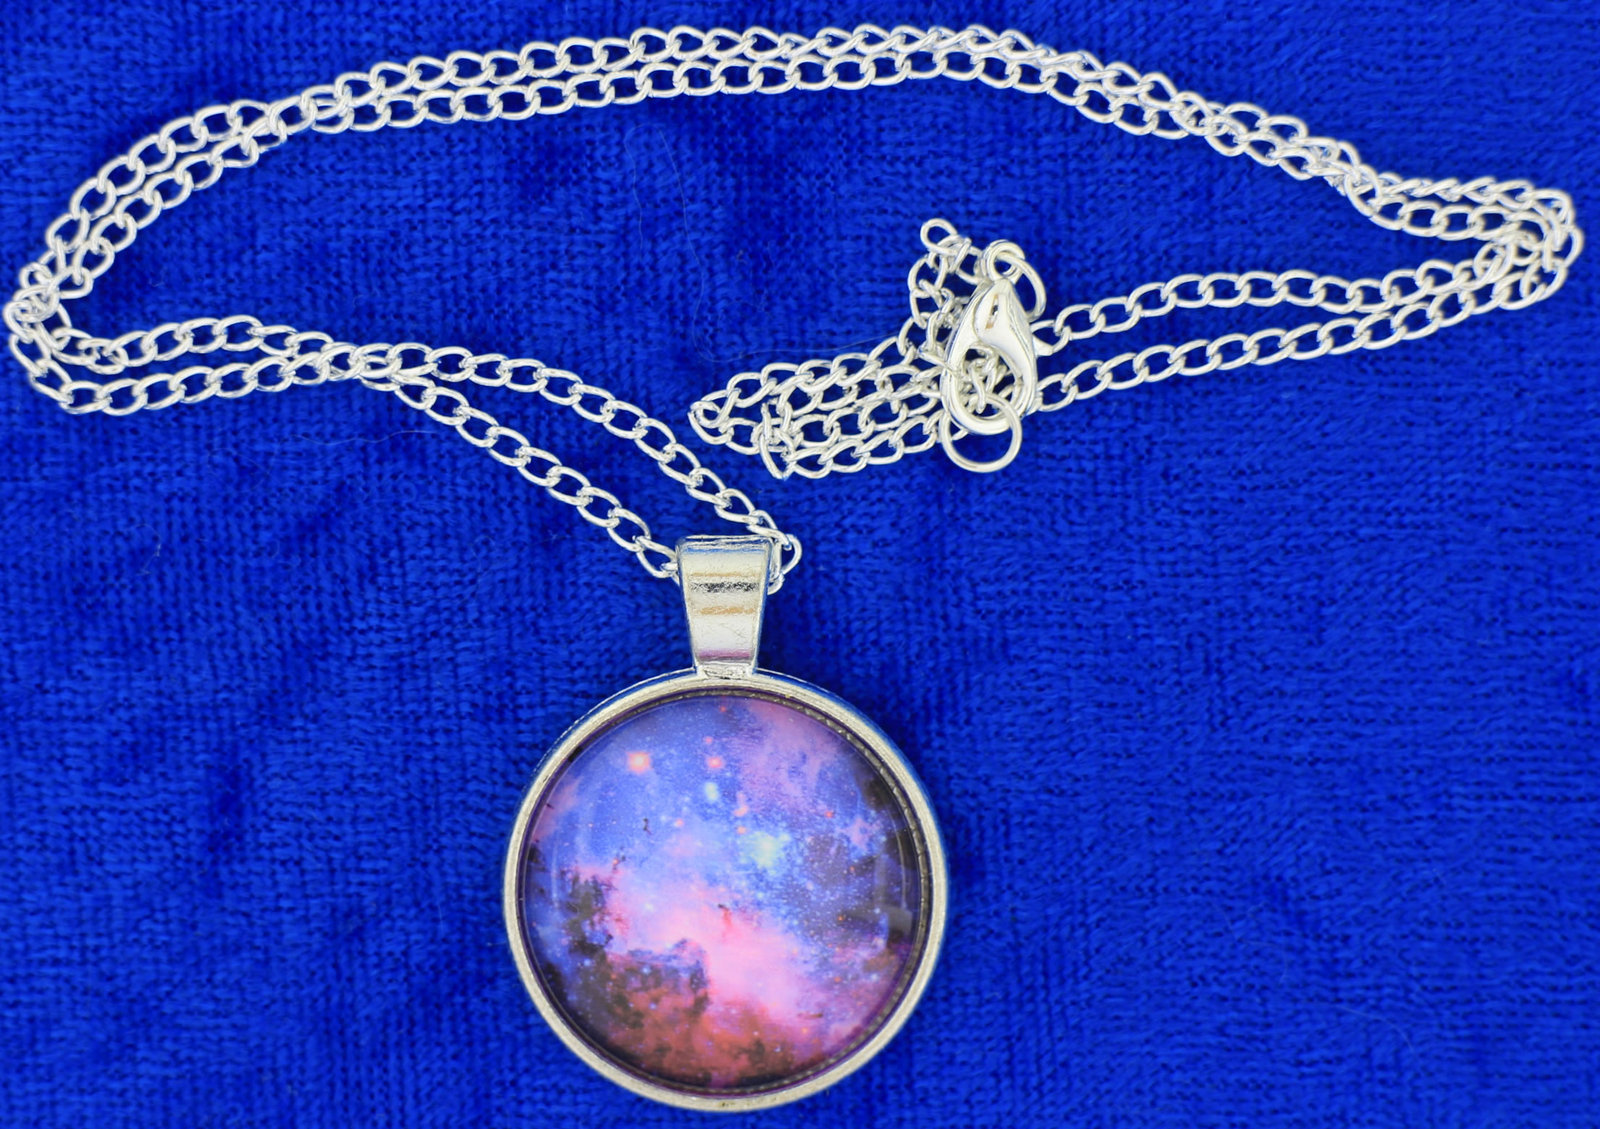 Nebula Fog Necklace Cosmos Universe Space Game Chain Style Length Choice - $4.99 - $6.49